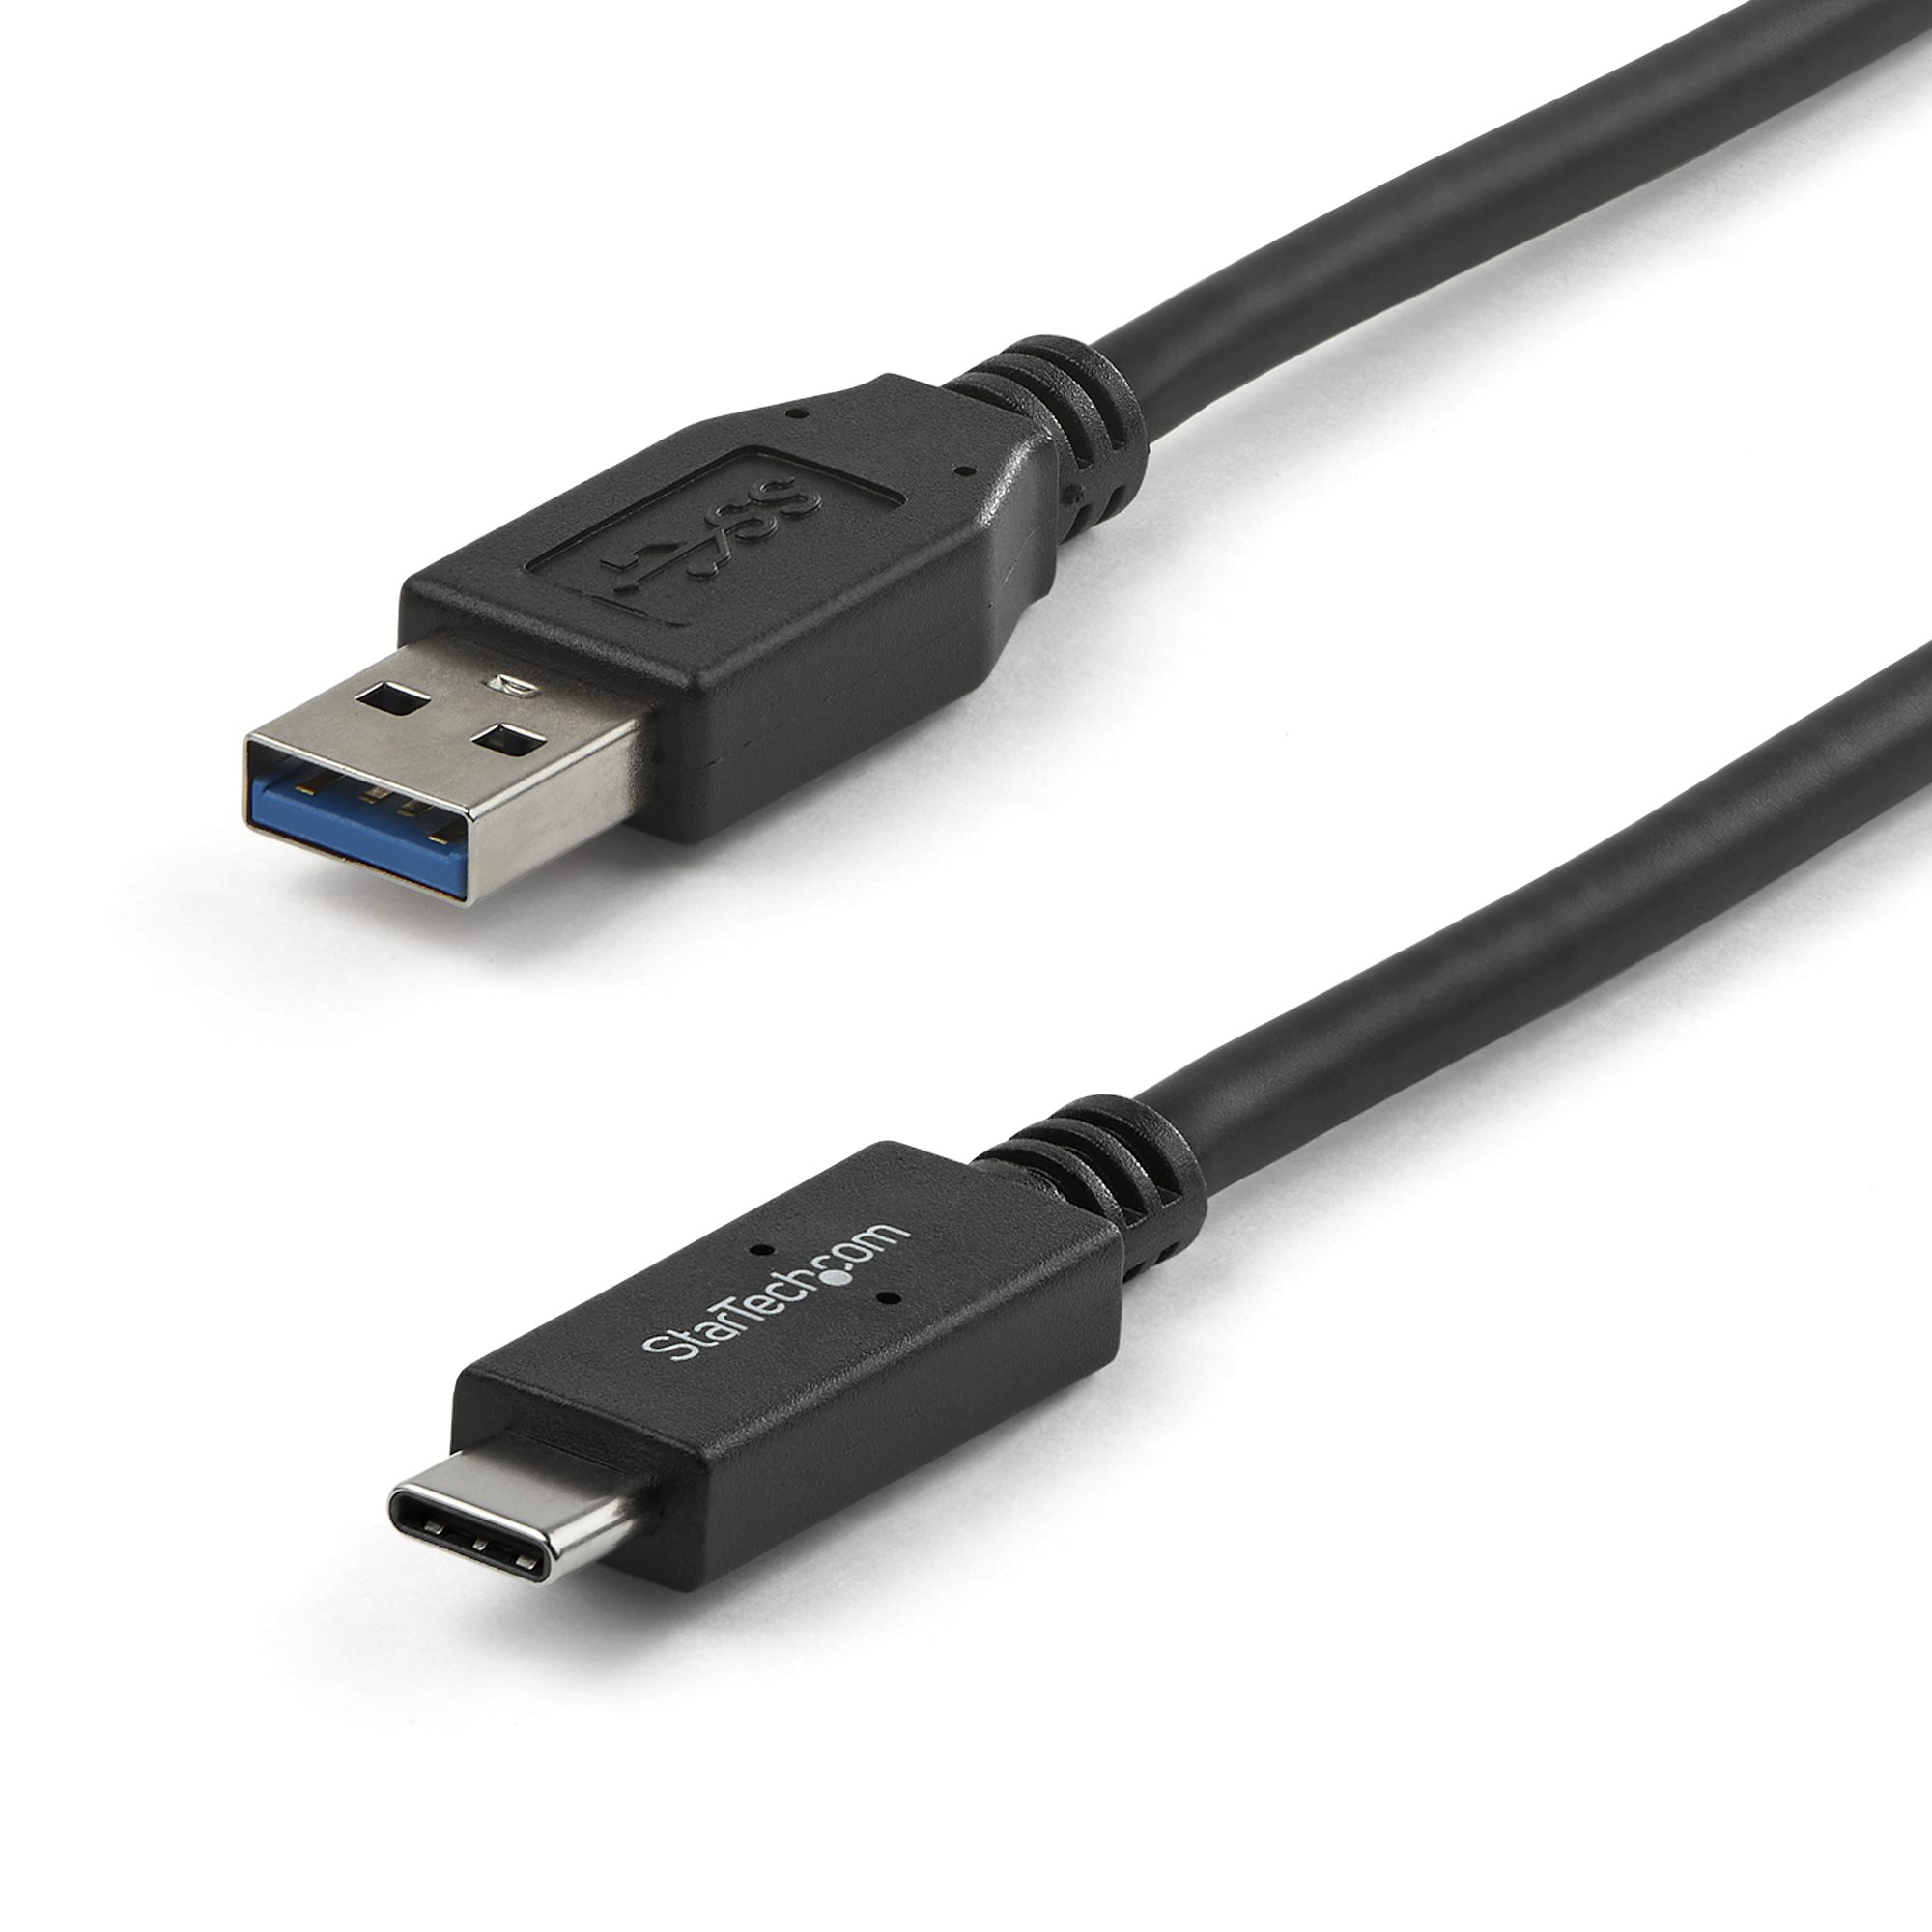 Cable USB to USB C - 1m USB 3.1 10Gbps USB-C Cables |